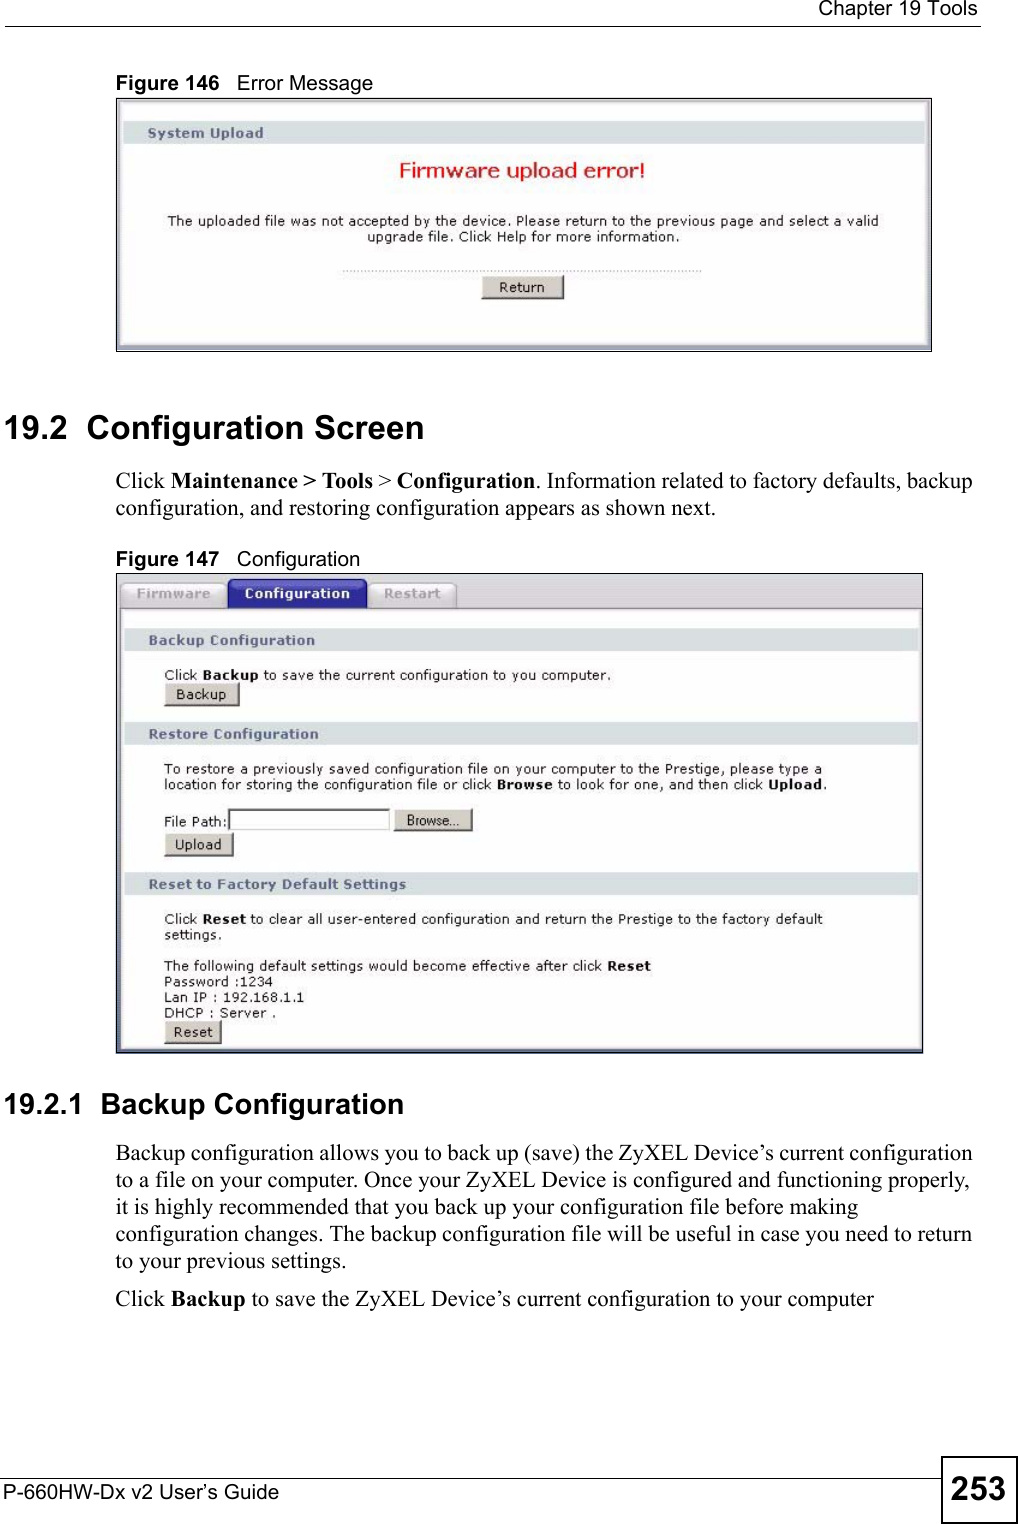  Chapter 19 ToolsP-660HW-Dx v2 User’s Guide 253Figure 146   Error Message19.2  Configuration ScreenClick Maintenance &gt; Tools &gt; Configuration. Information related to factory defaults, backup configuration, and restoring configuration appears as shown next.Figure 147   Configuration19.2.1  Backup ConfigurationBackup configuration allows you to back up (save) the ZyXEL Device’s current configuration to a file on your computer. Once your ZyXEL Device is configured and functioning properly, it is highly recommended that you back up your configuration file before making configuration changes. The backup configuration file will be useful in case you need to return to your previous settings. Click Backup to save the ZyXEL Device’s current configuration to your computer